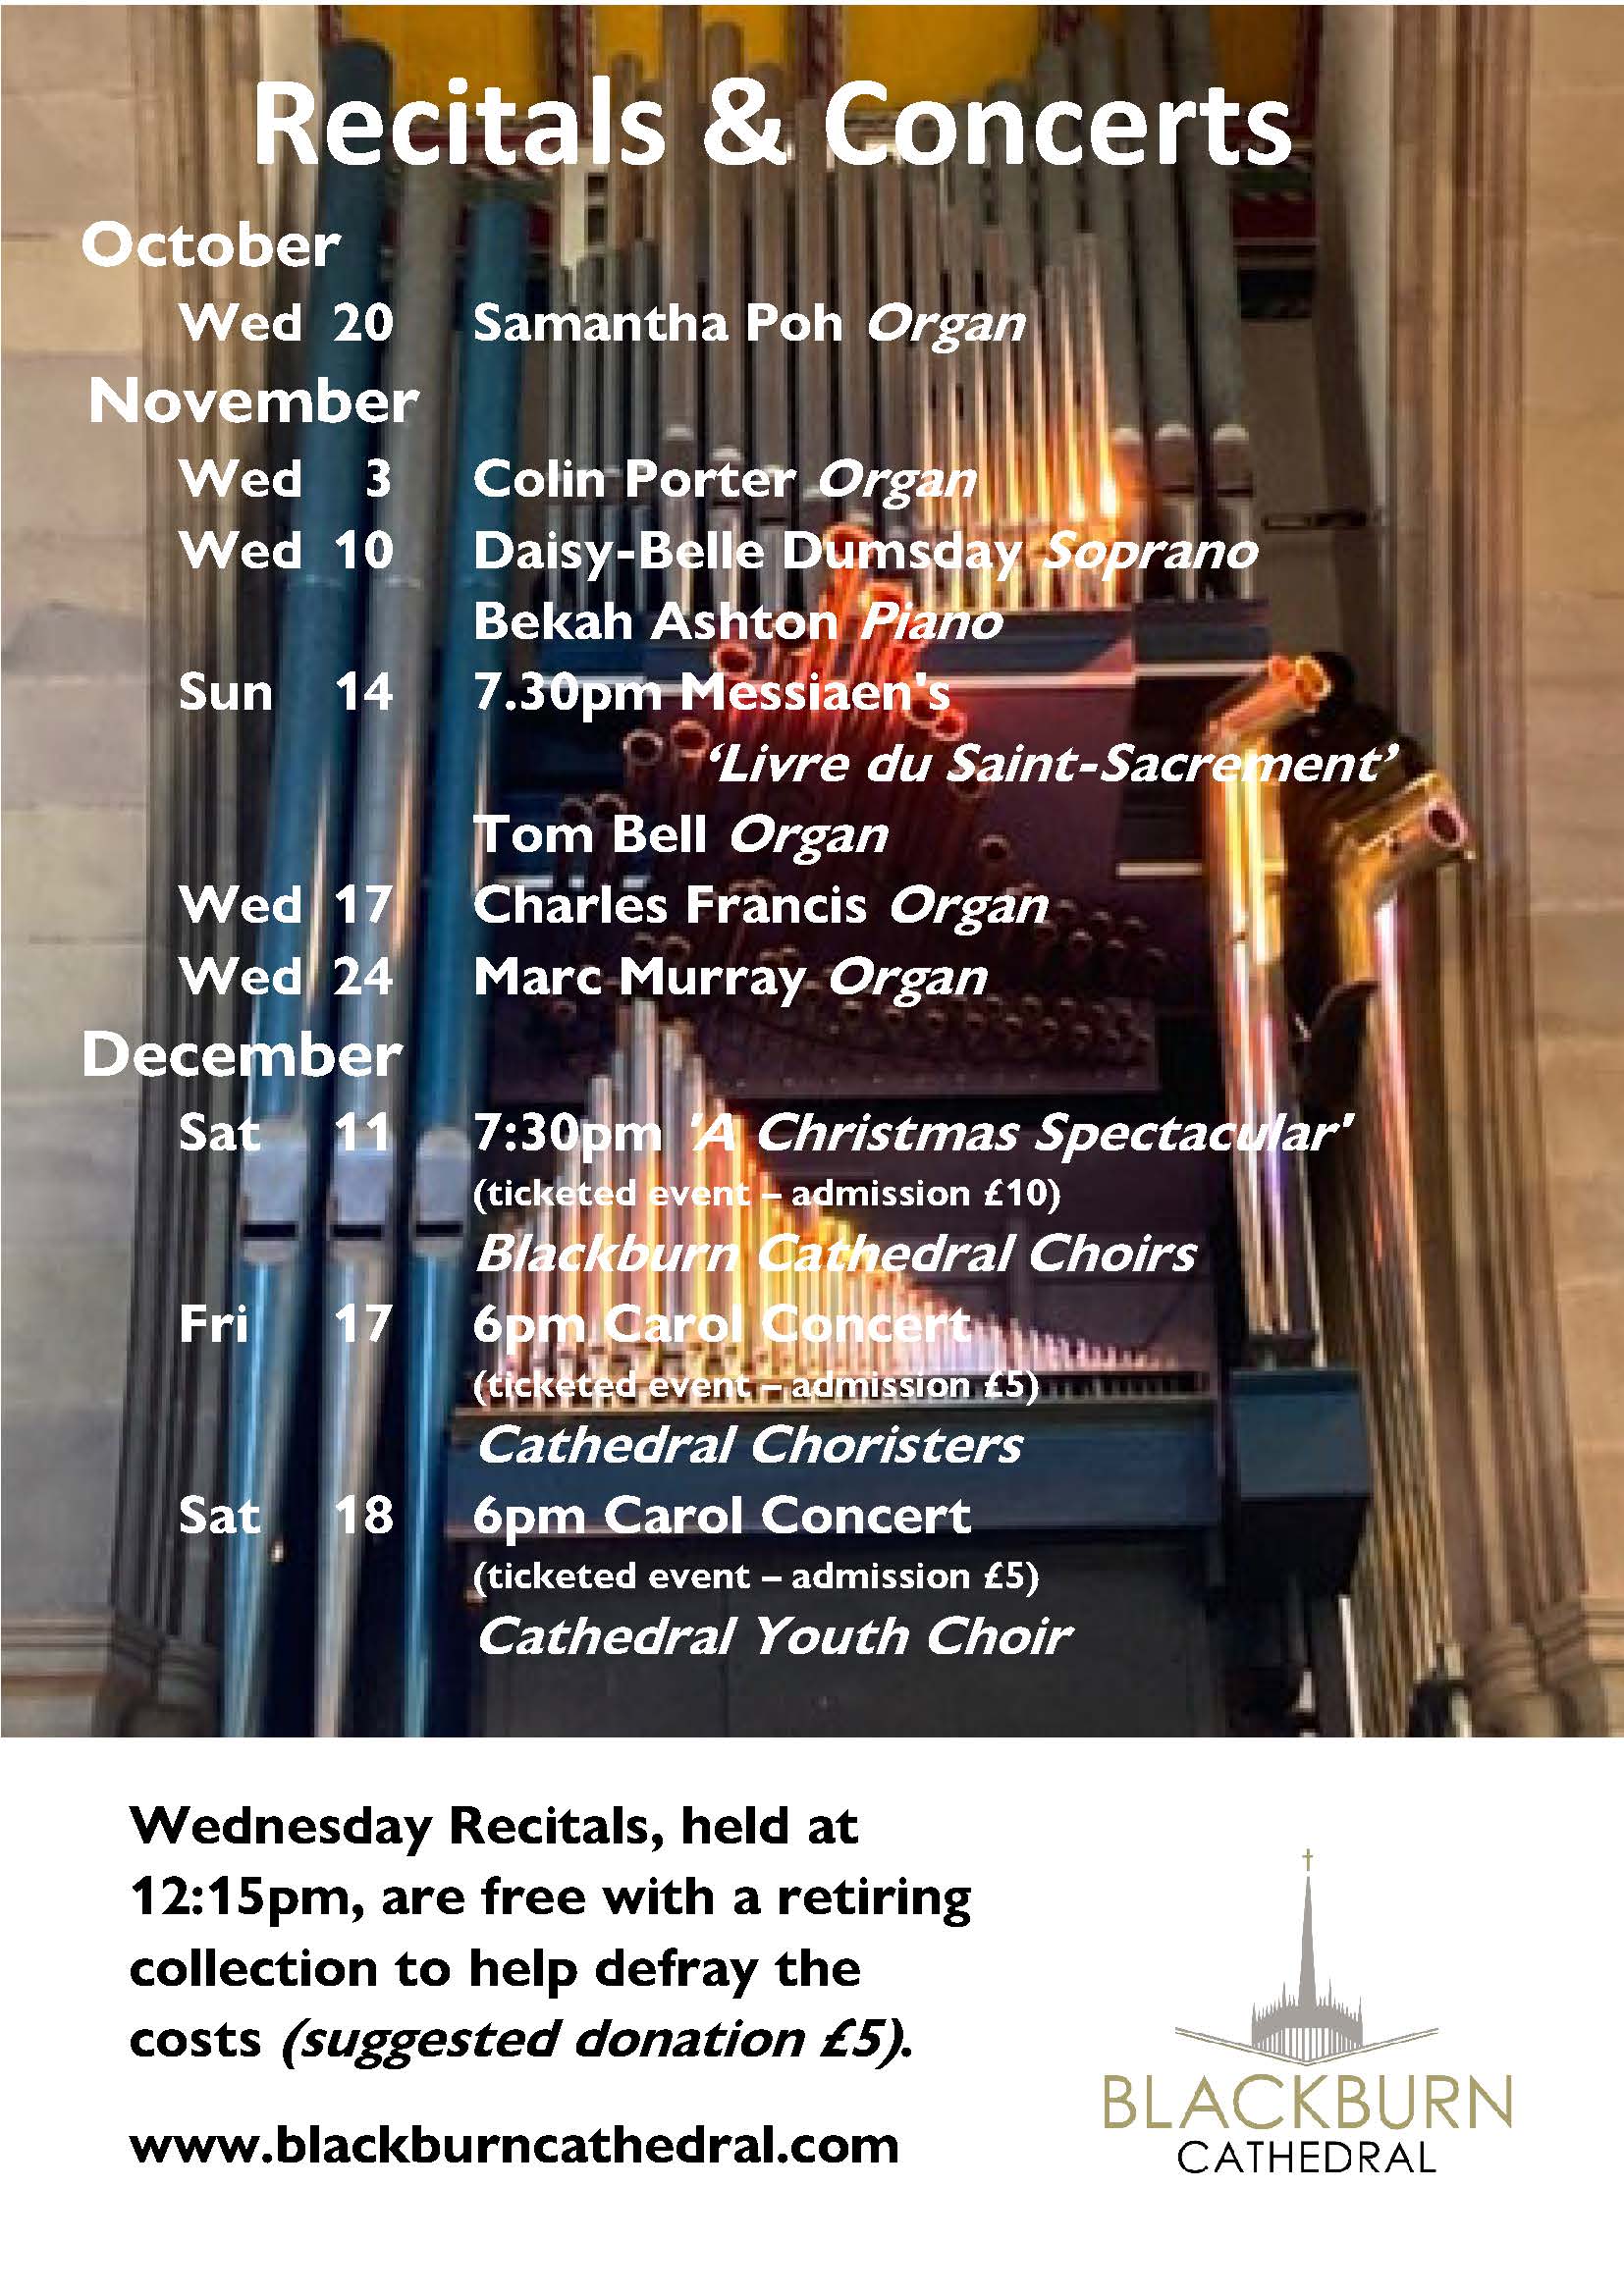 Dates and times of Recitals &amp; Concerts at Blackburn Cathedral